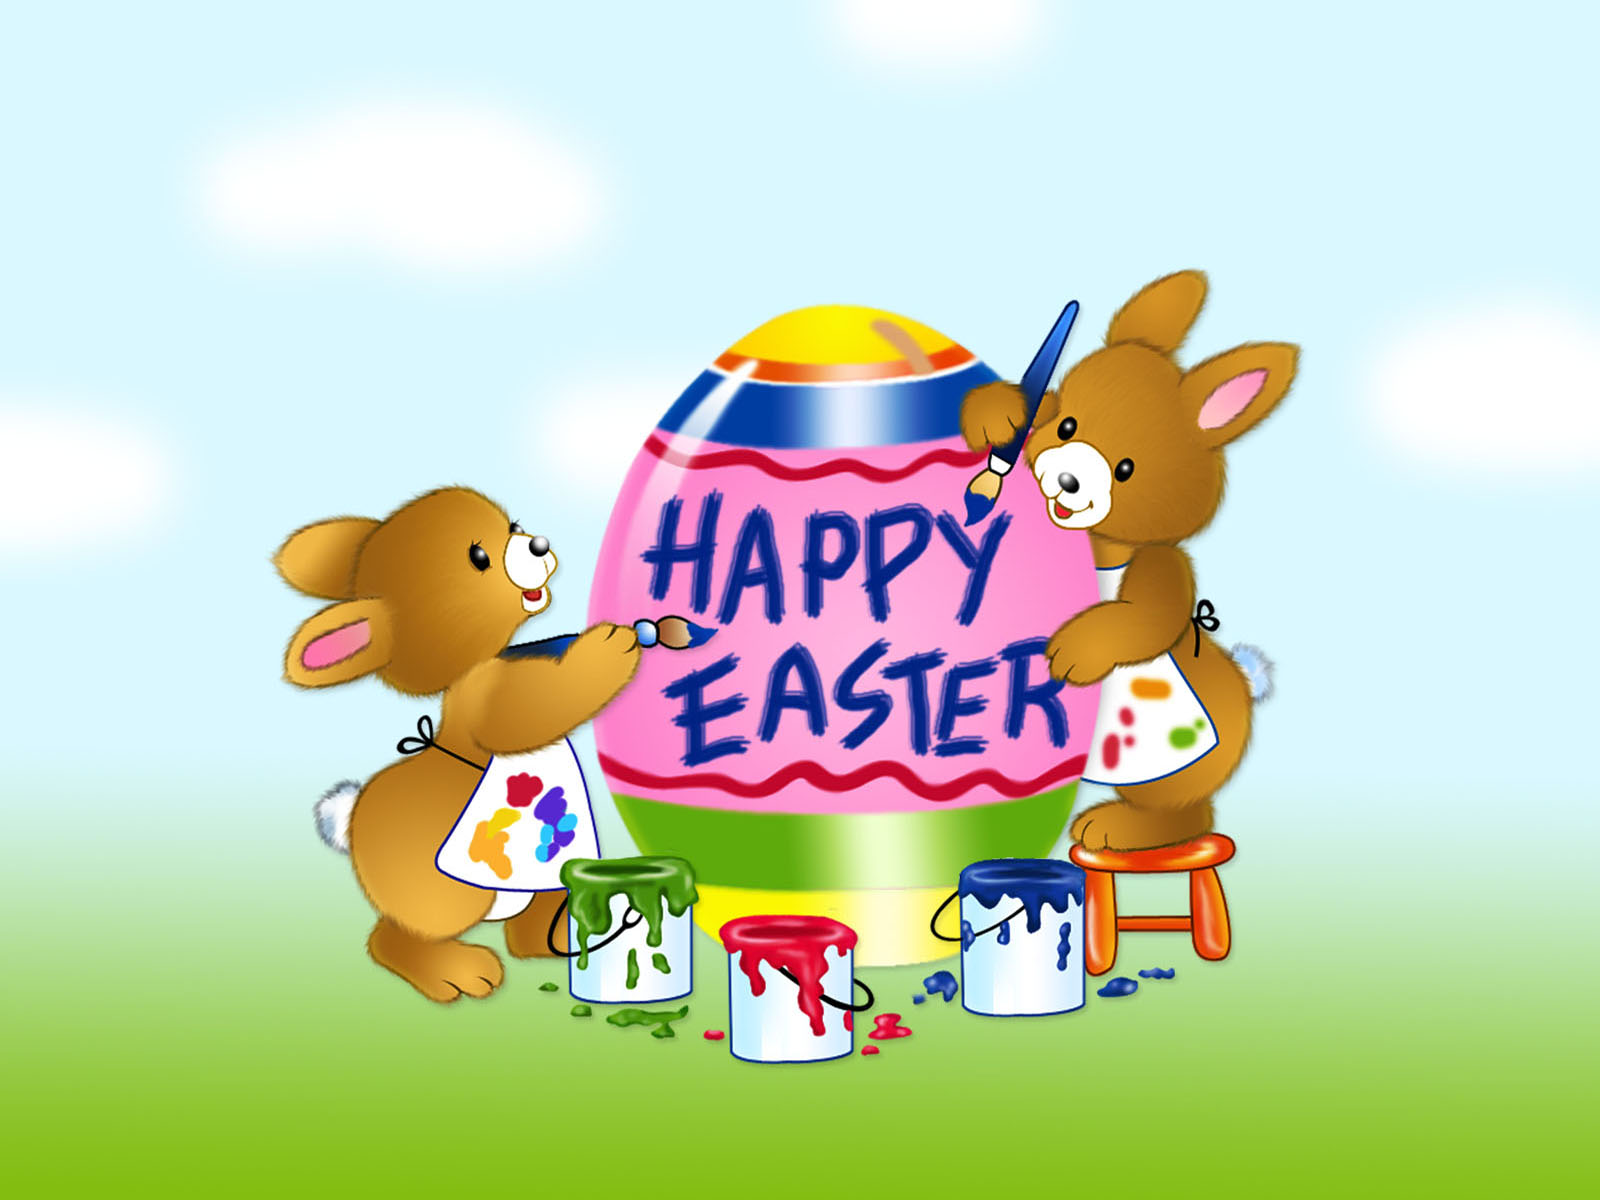 Happy Easter All My Fans Image HD Wallpaper And Background